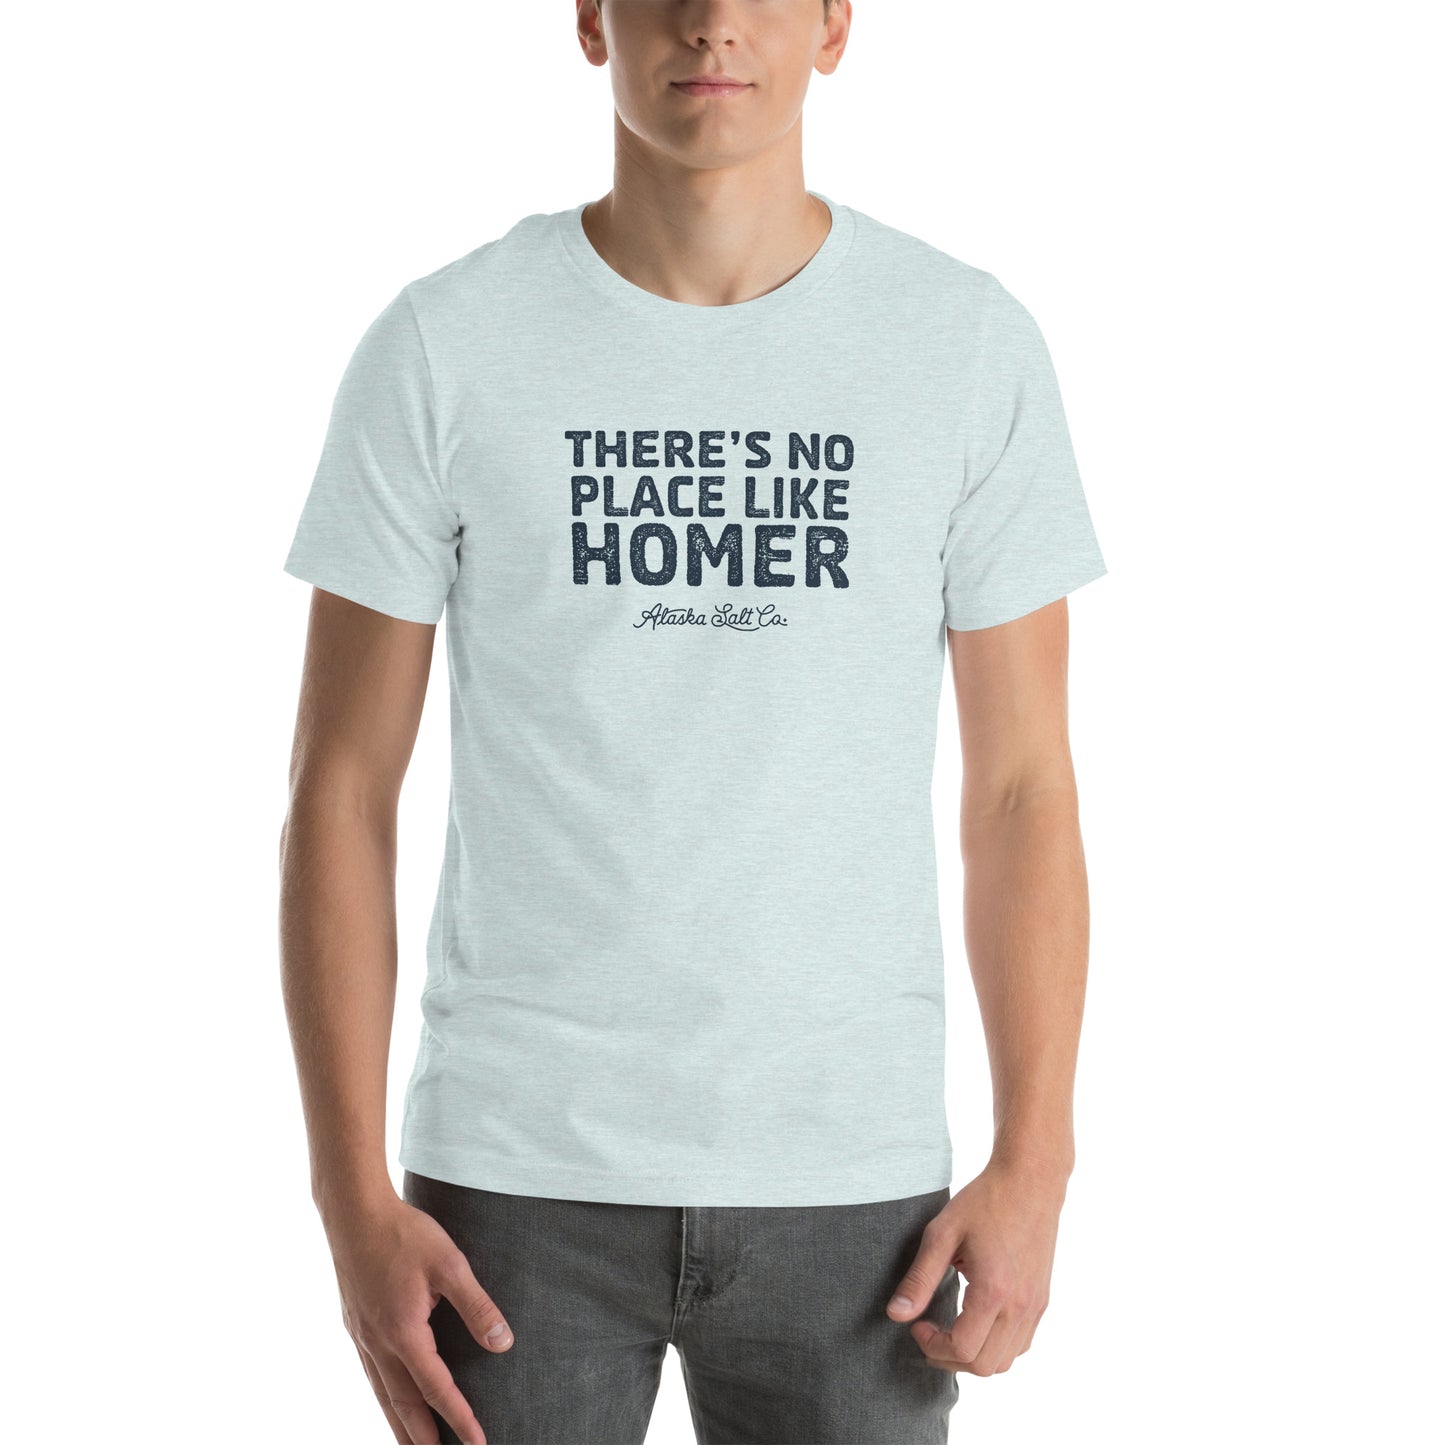 There's No Place Like Homer tee